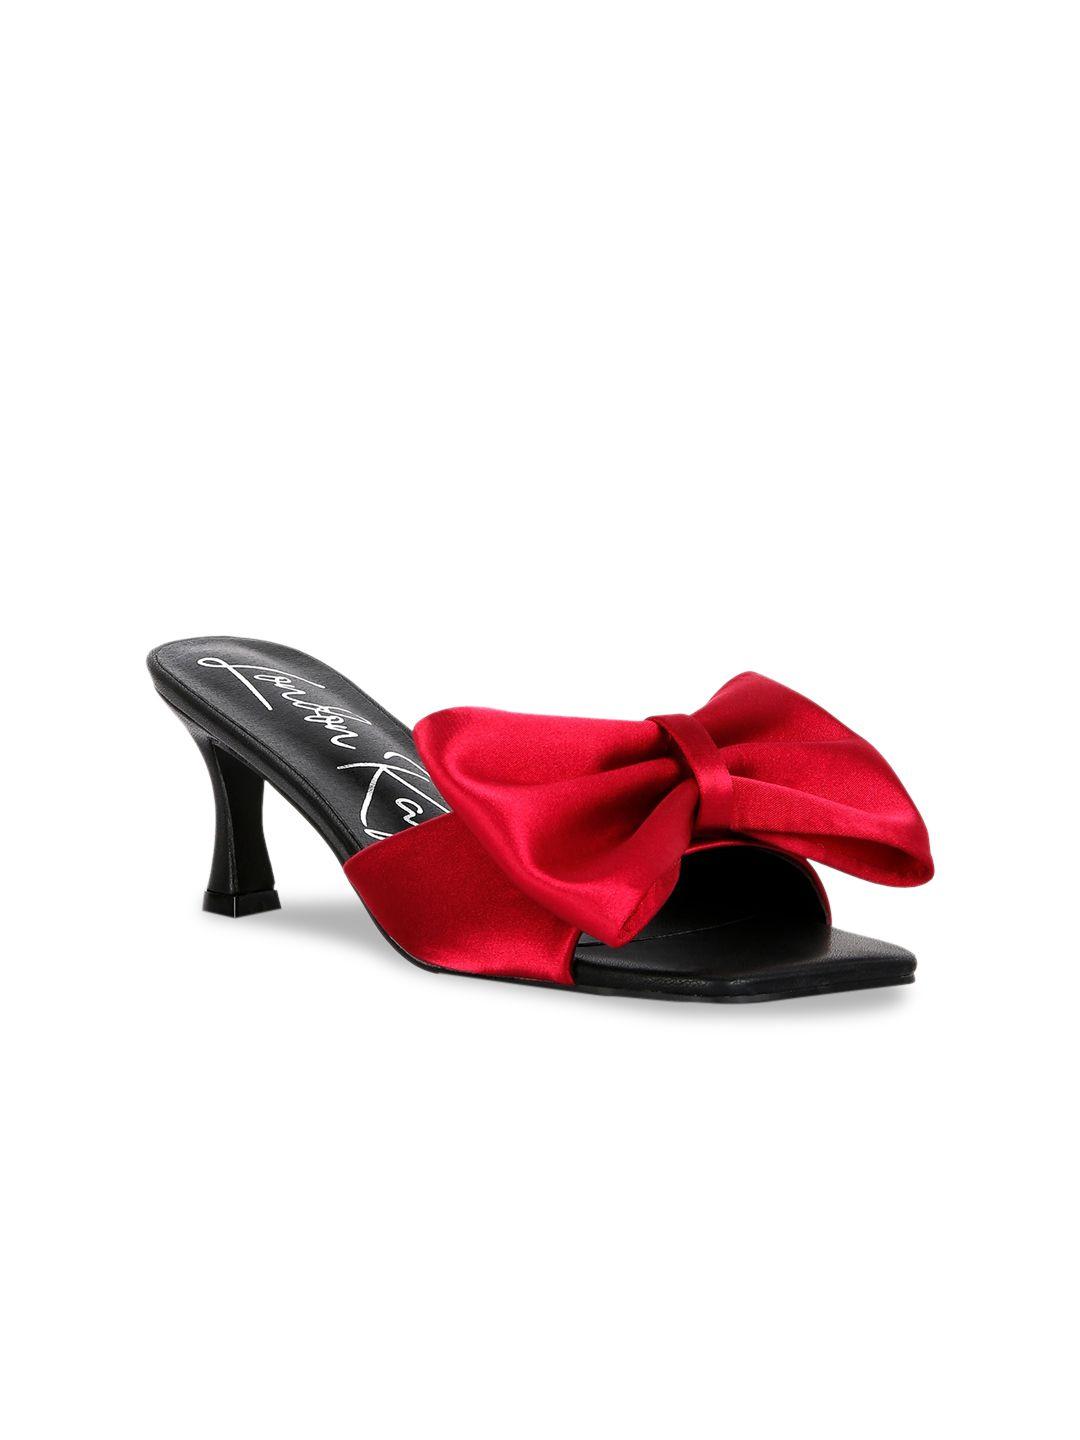 london-rag-red-&-black-colourblocked-party-kitten-peep-toes-heels-with-bows